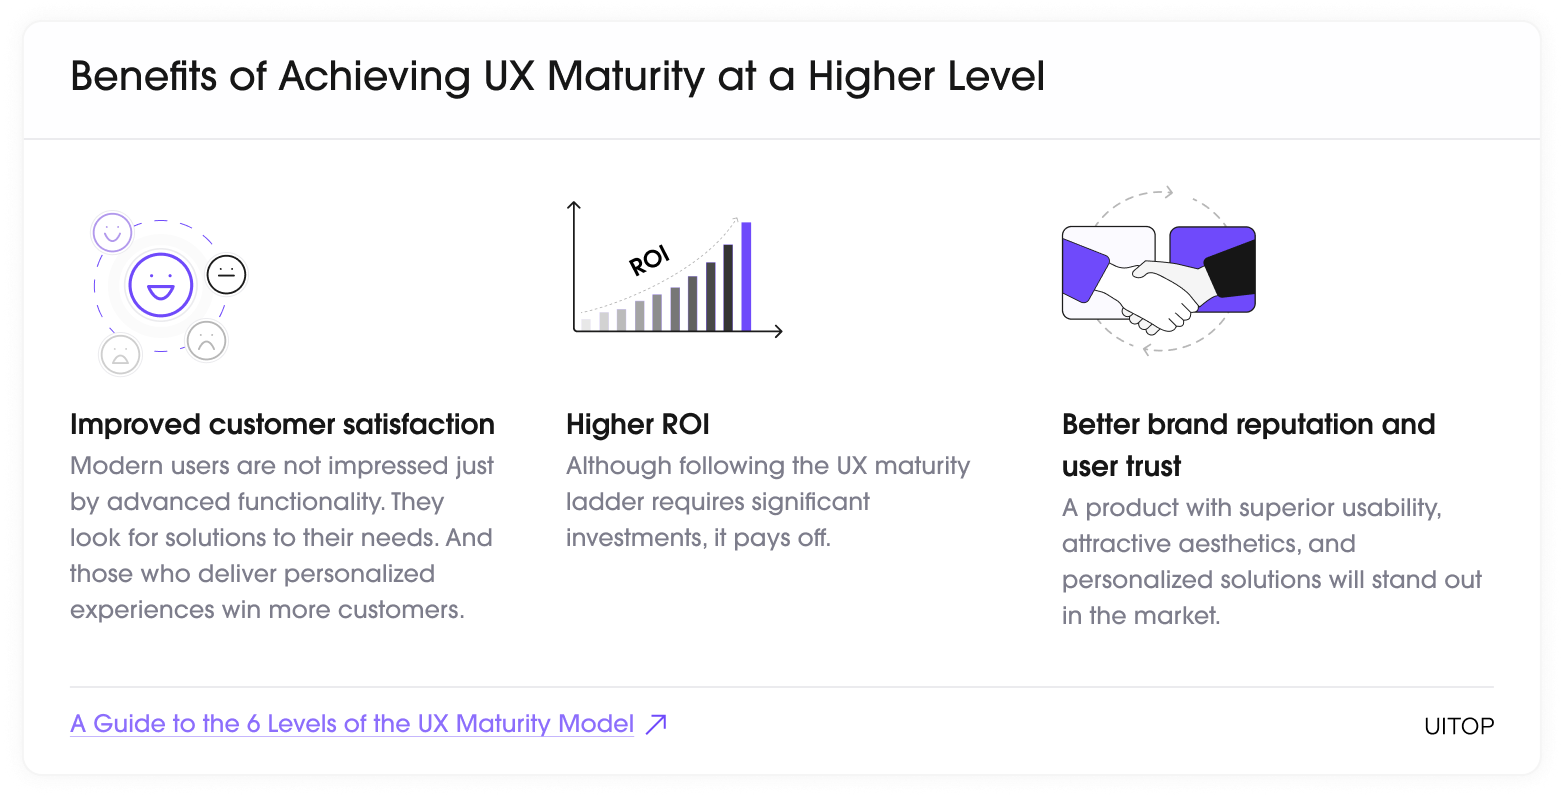 Benefits of Achieving UX Maturity